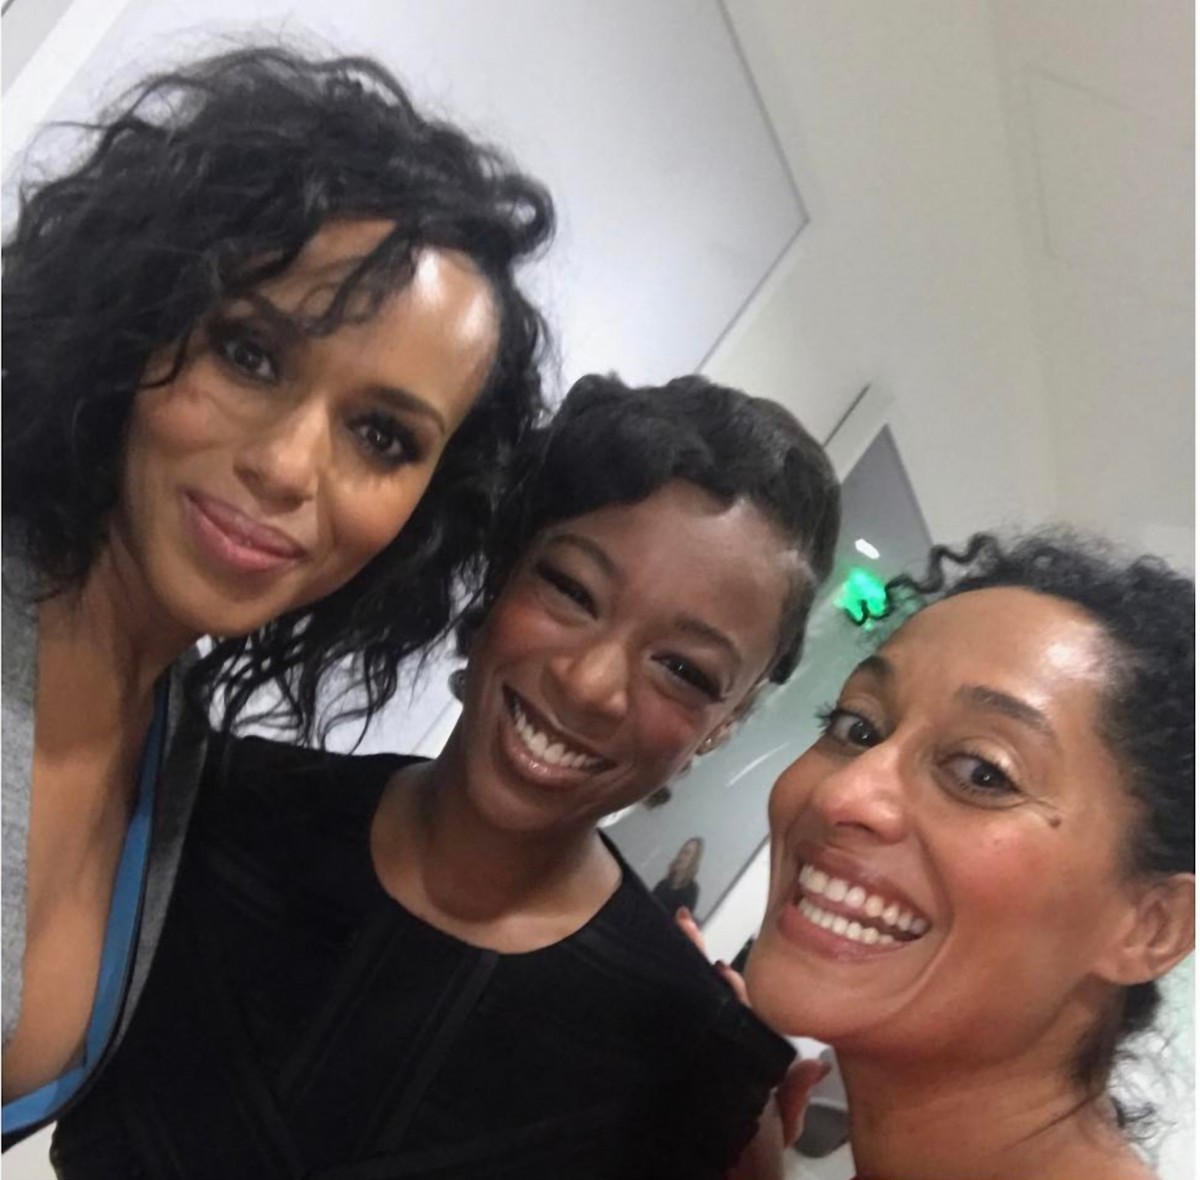 Tracee Ellis Ross has posted a photo on Instagram with the following remarks:Loved seeing these ladies at the @Variety #Emmys Studio @KerryWashington @WhoDoDatLikeDatThank you @DebraBirnbaum for a lovely afternoon full of so many incredible actresses! #blackish Instagram, 2017-05-08 10:42:23